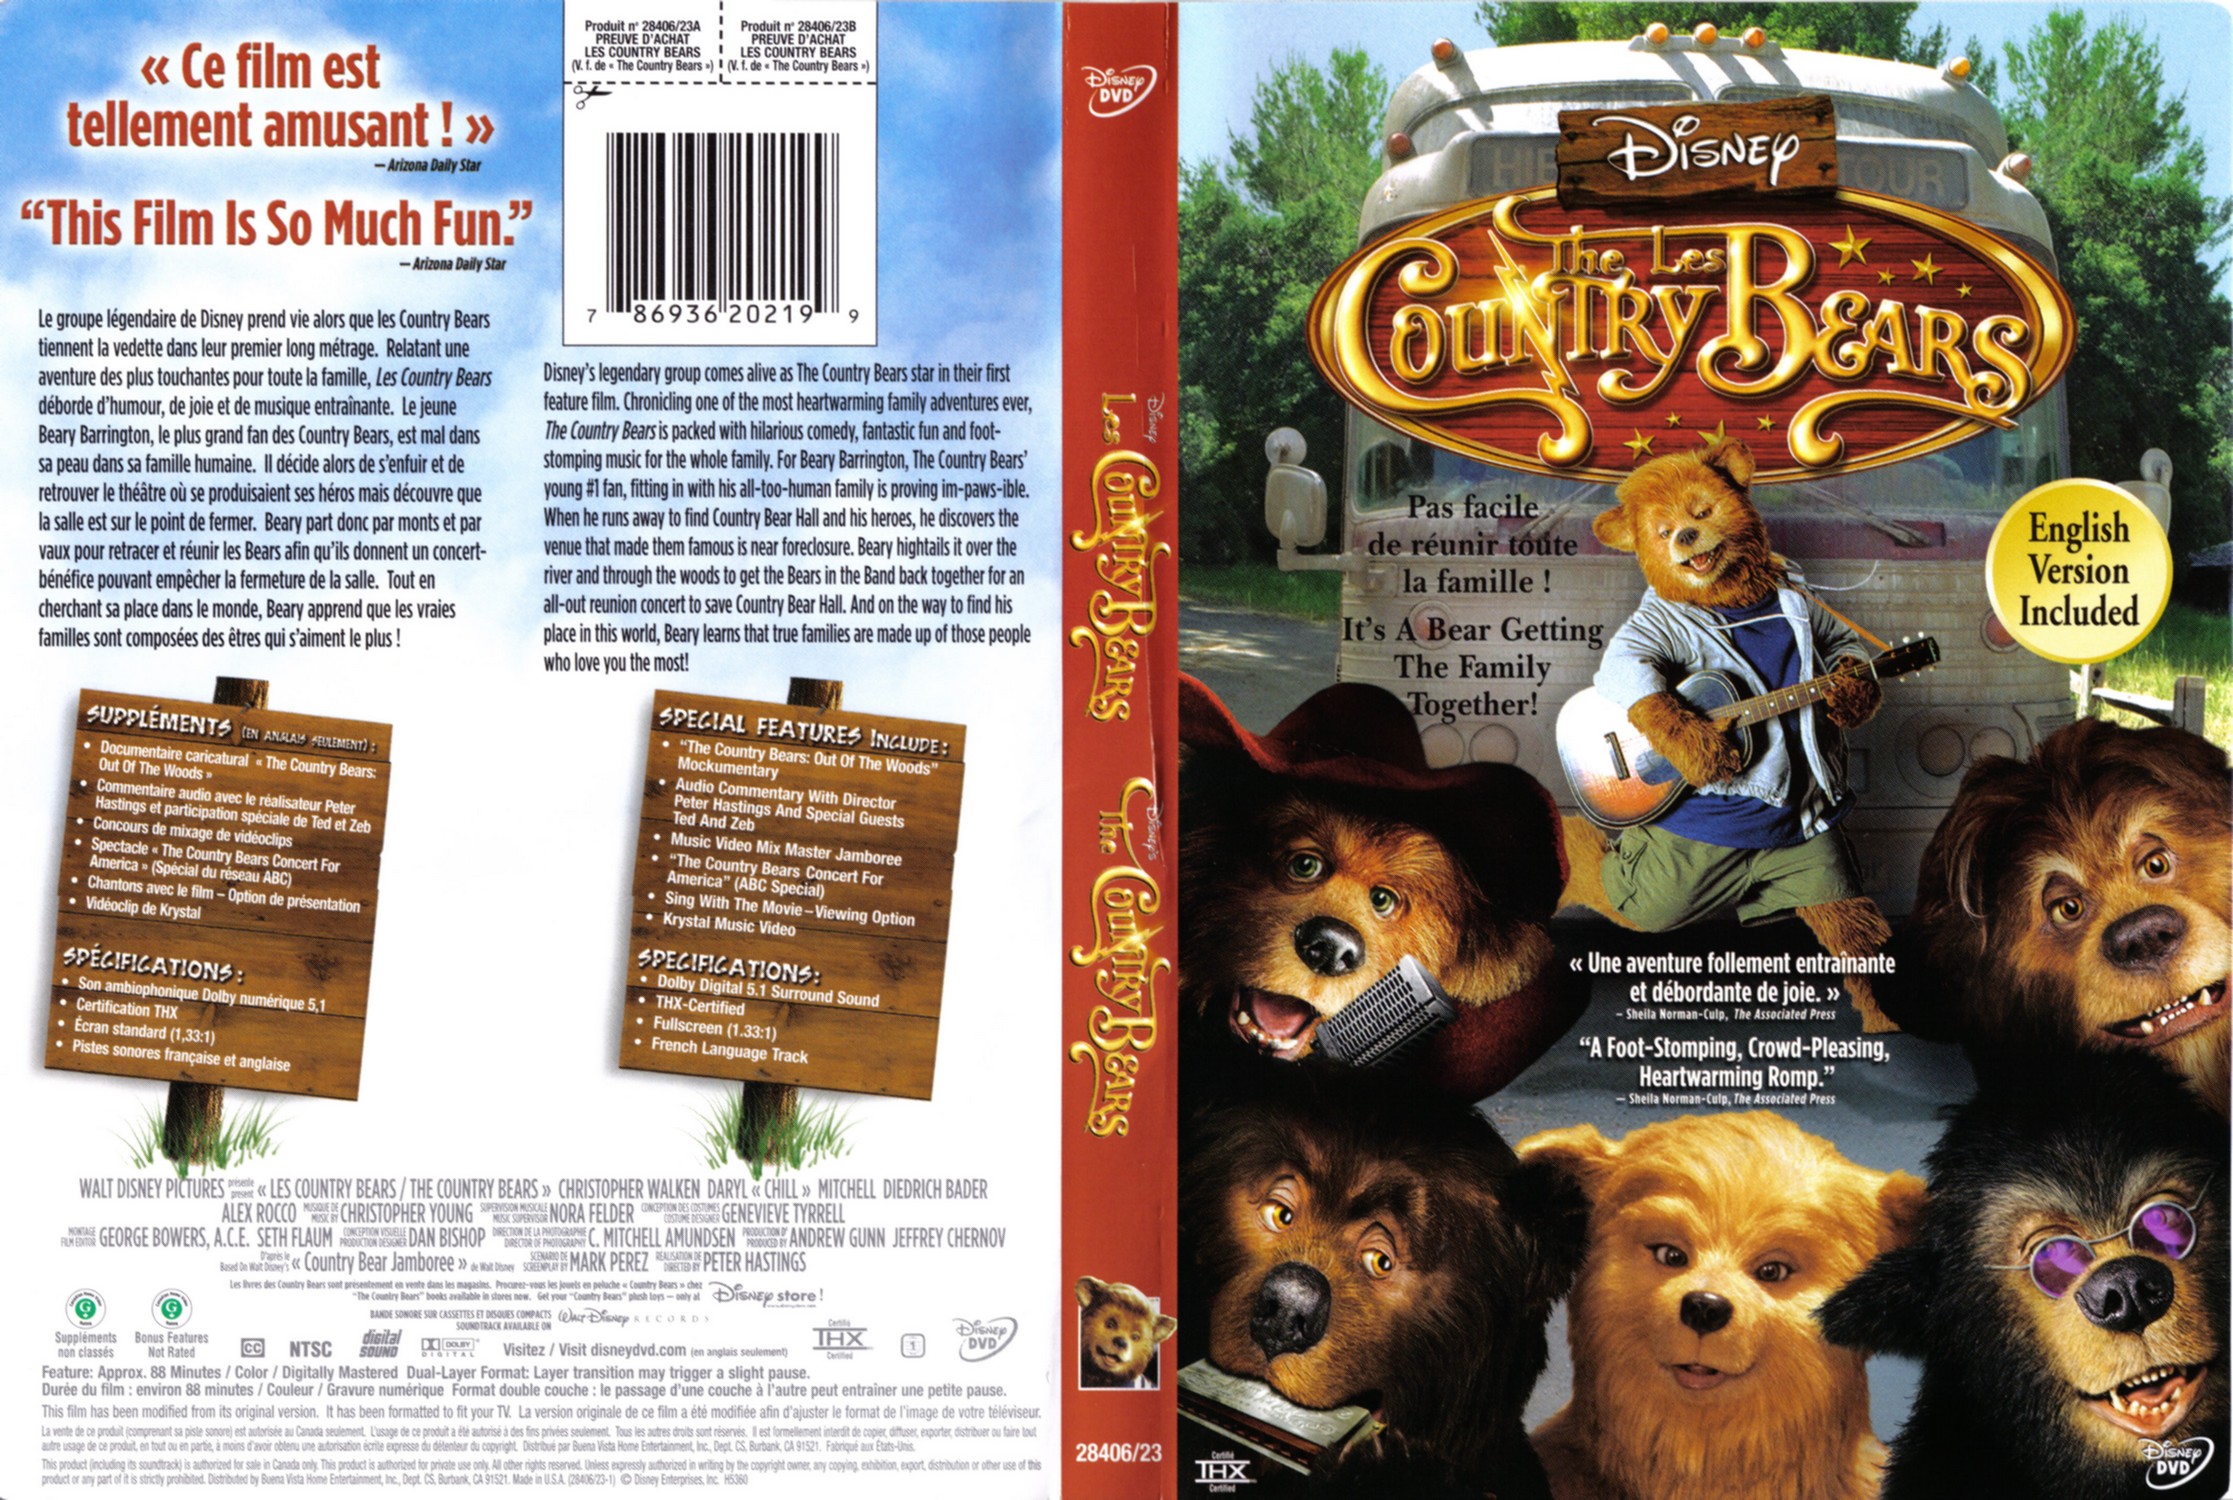 Jaquette DVD The country bears